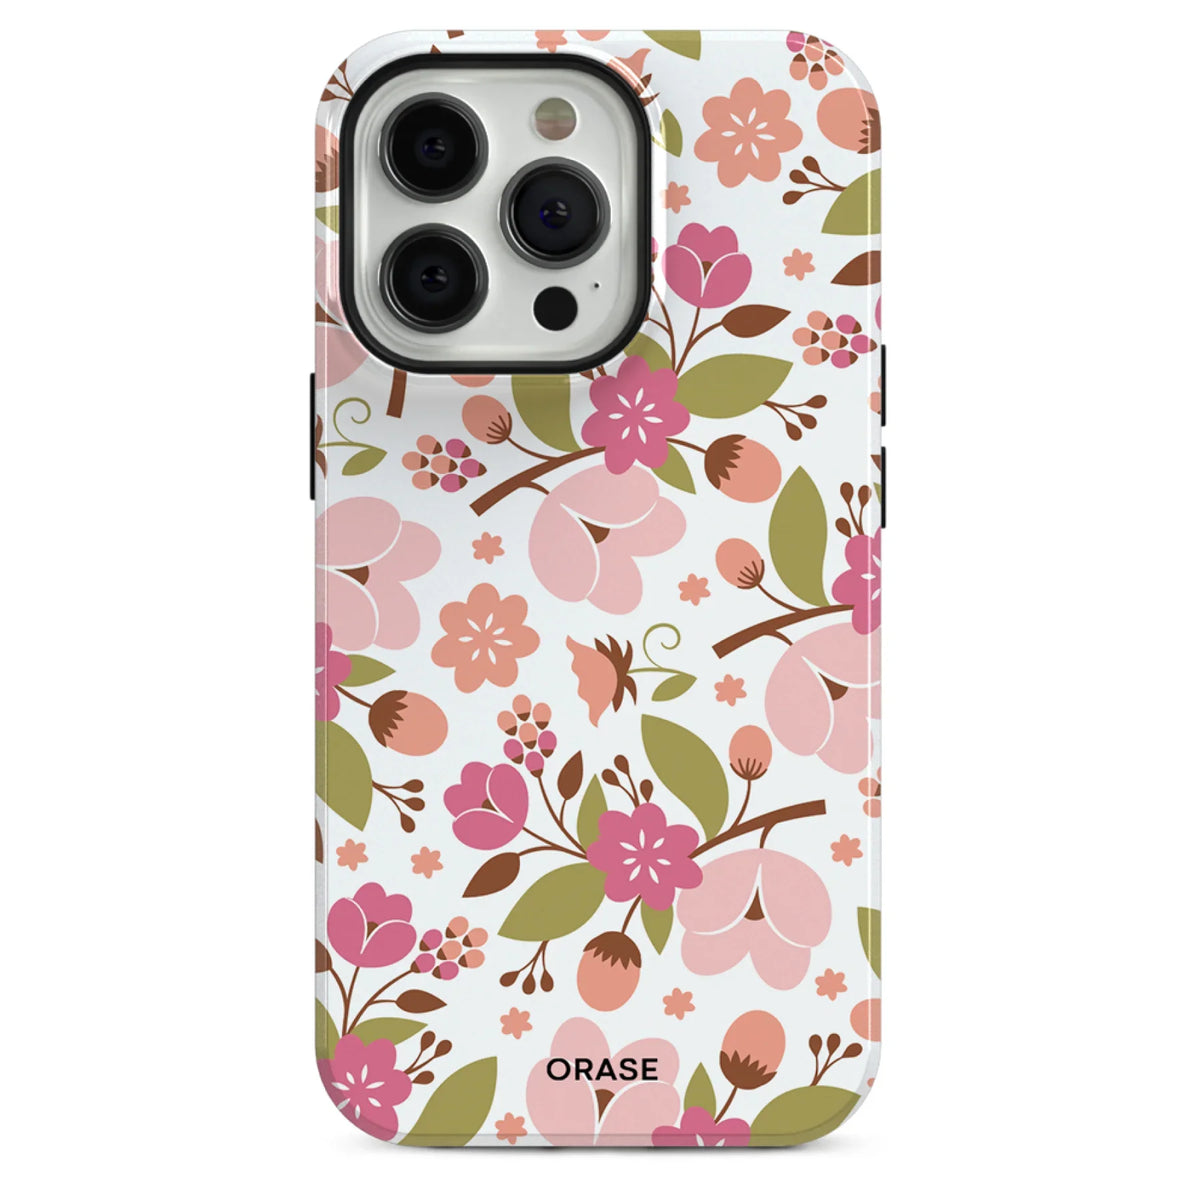 Flora Charms iPhone Case - iPhone 12 Pro Max